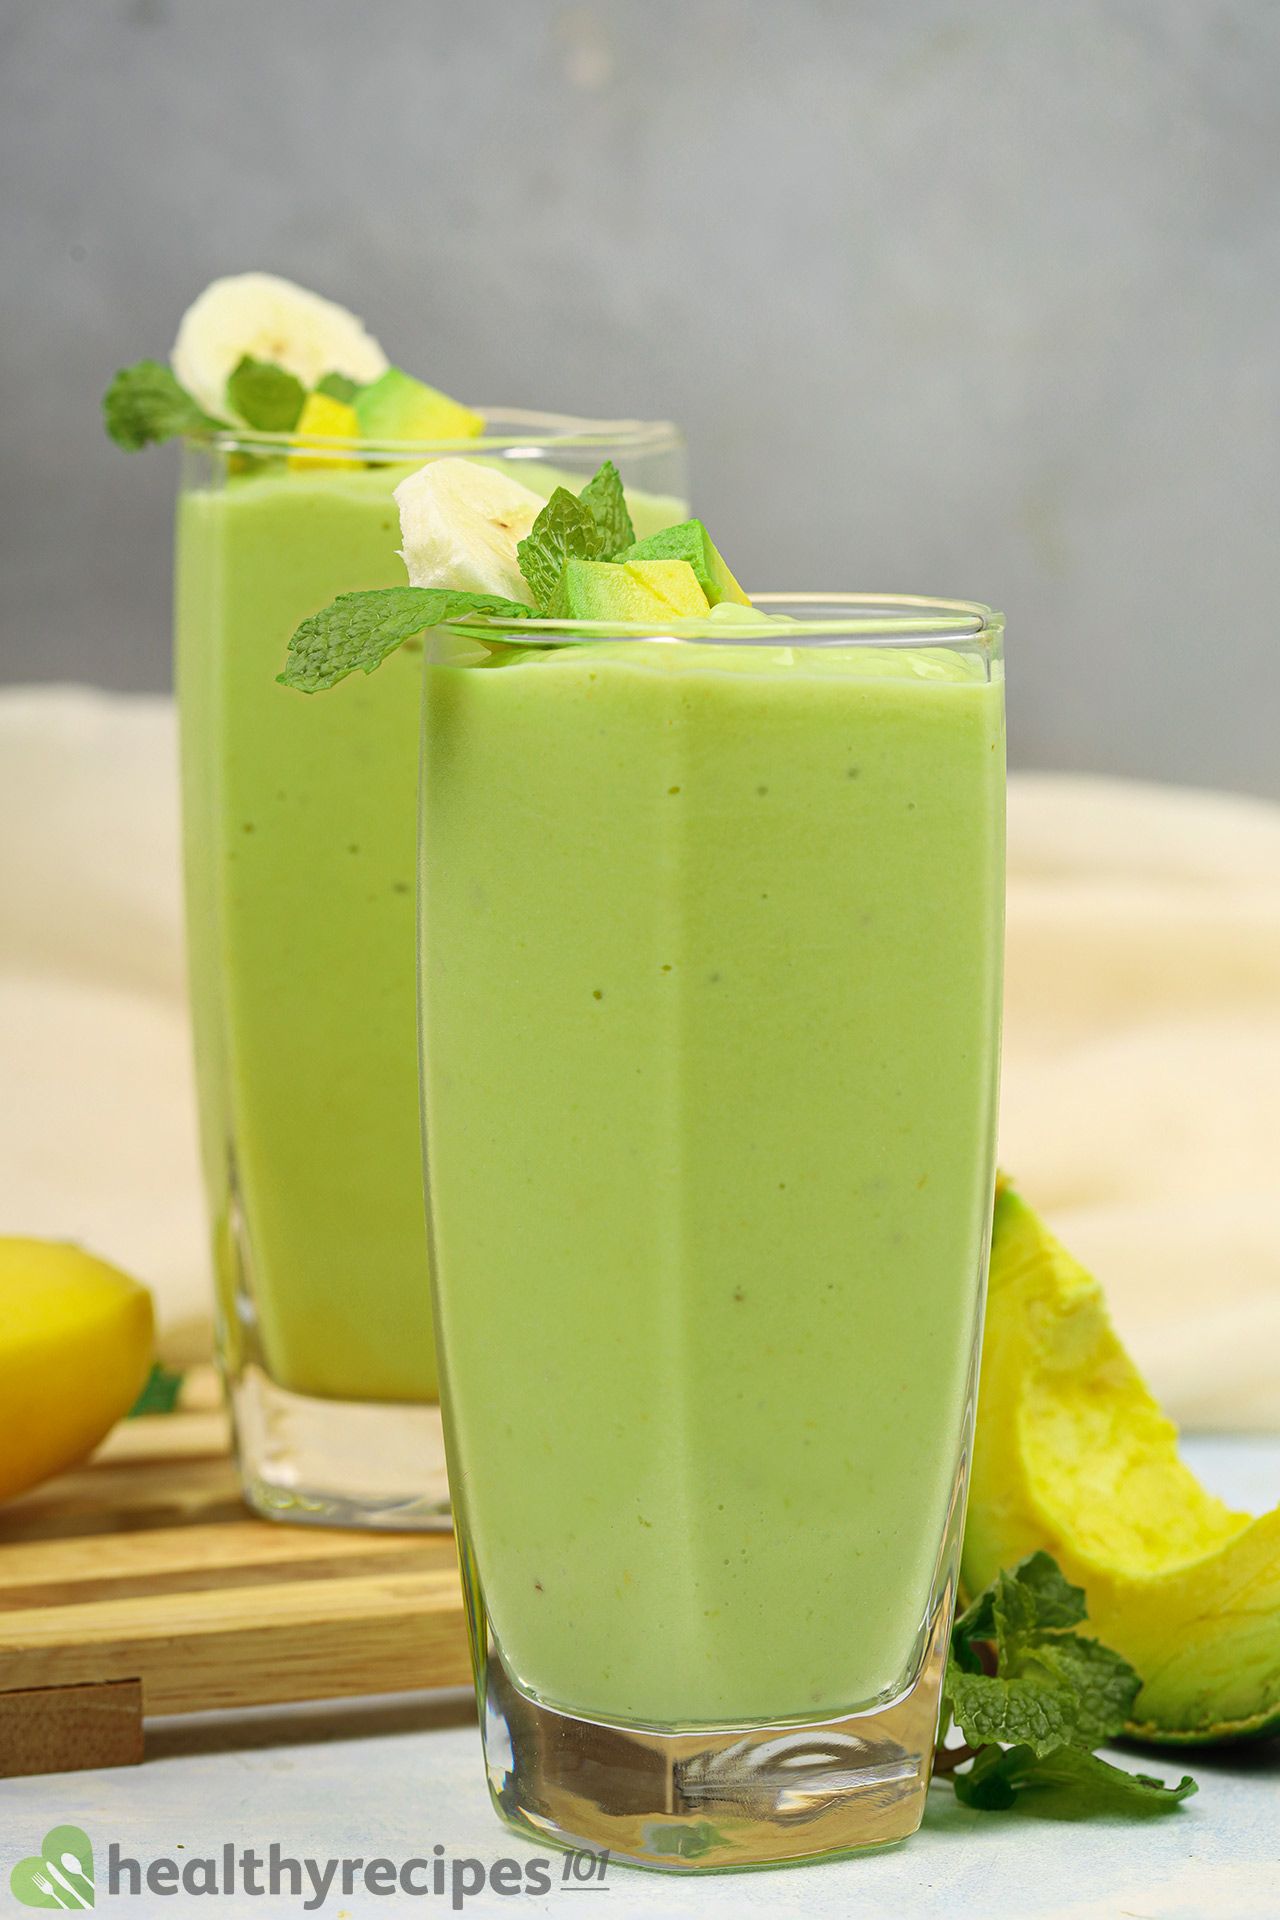 How to Store Leftover Avocado and Banana Smoothie